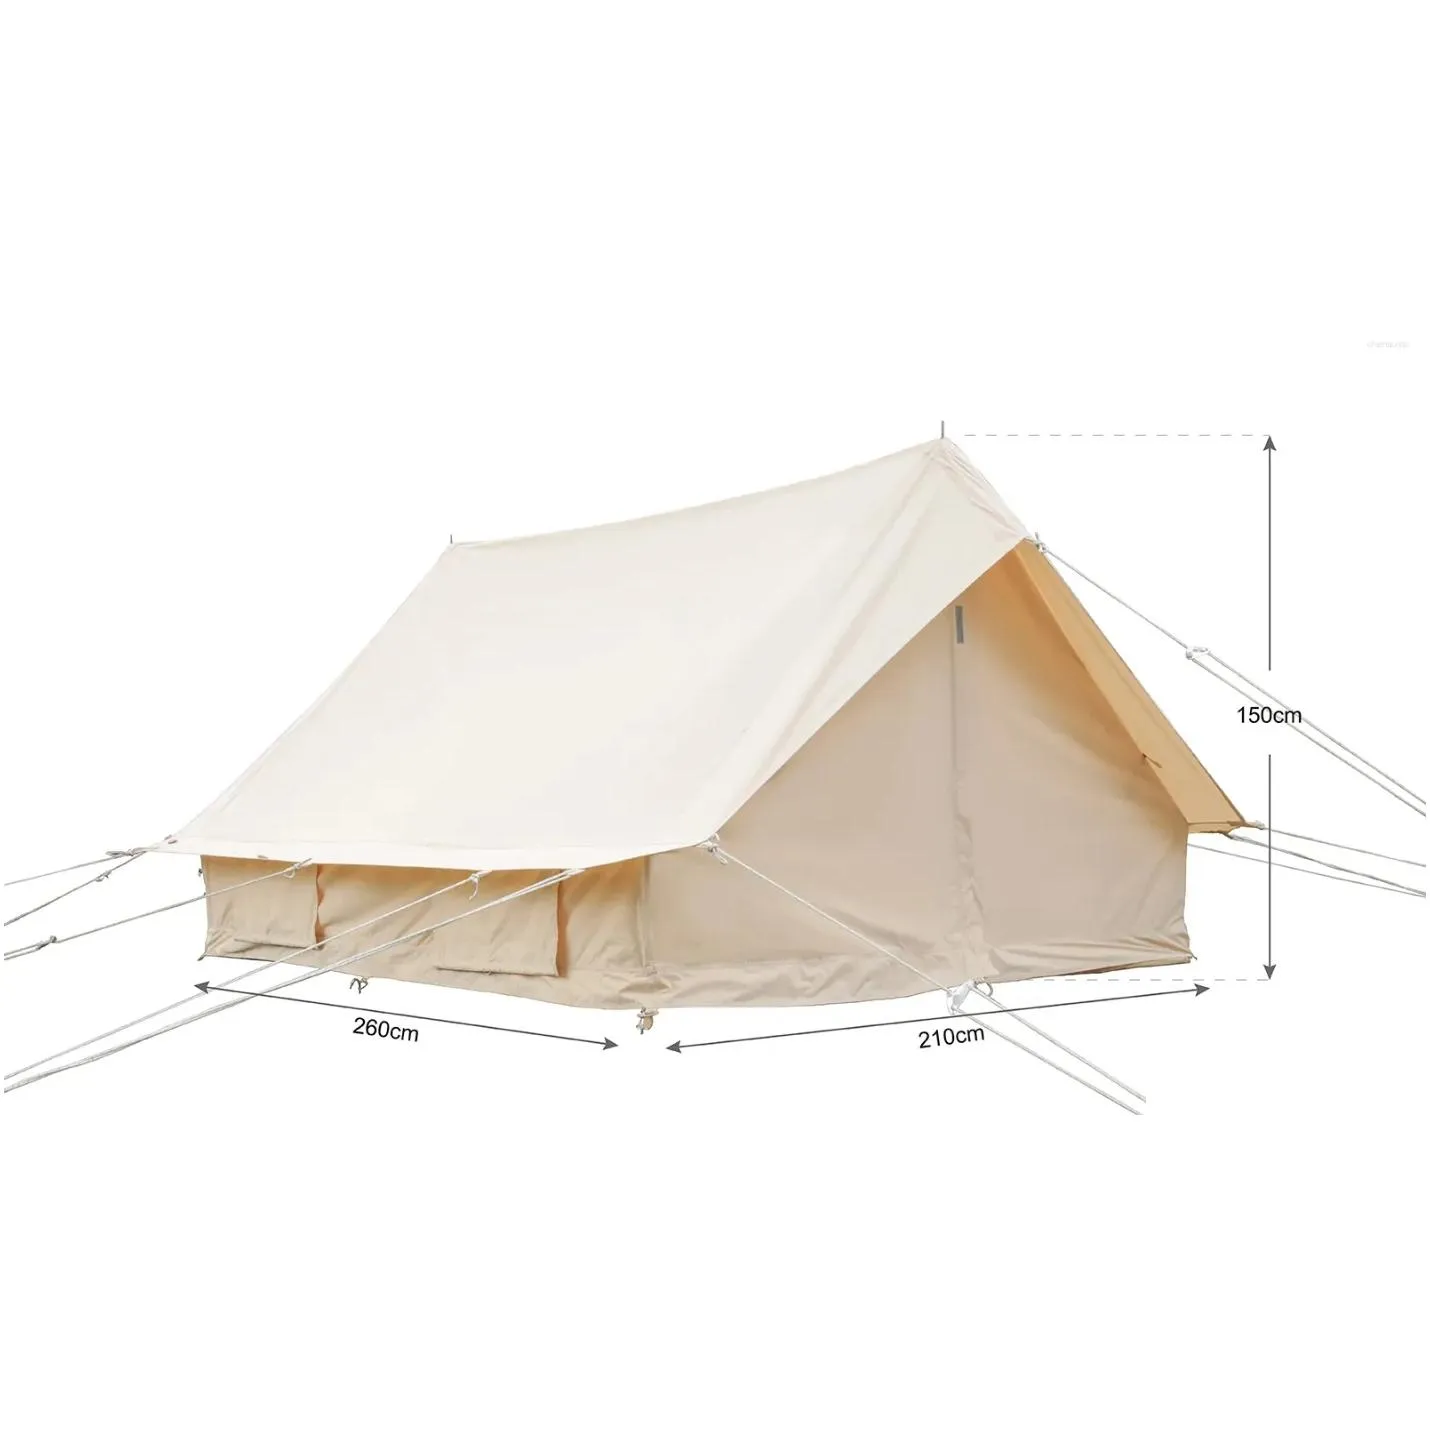 Tents And Shelters Waterproof Large Forest Poly Cotton Canvas Outdoor Hut Camping Luxury Tent